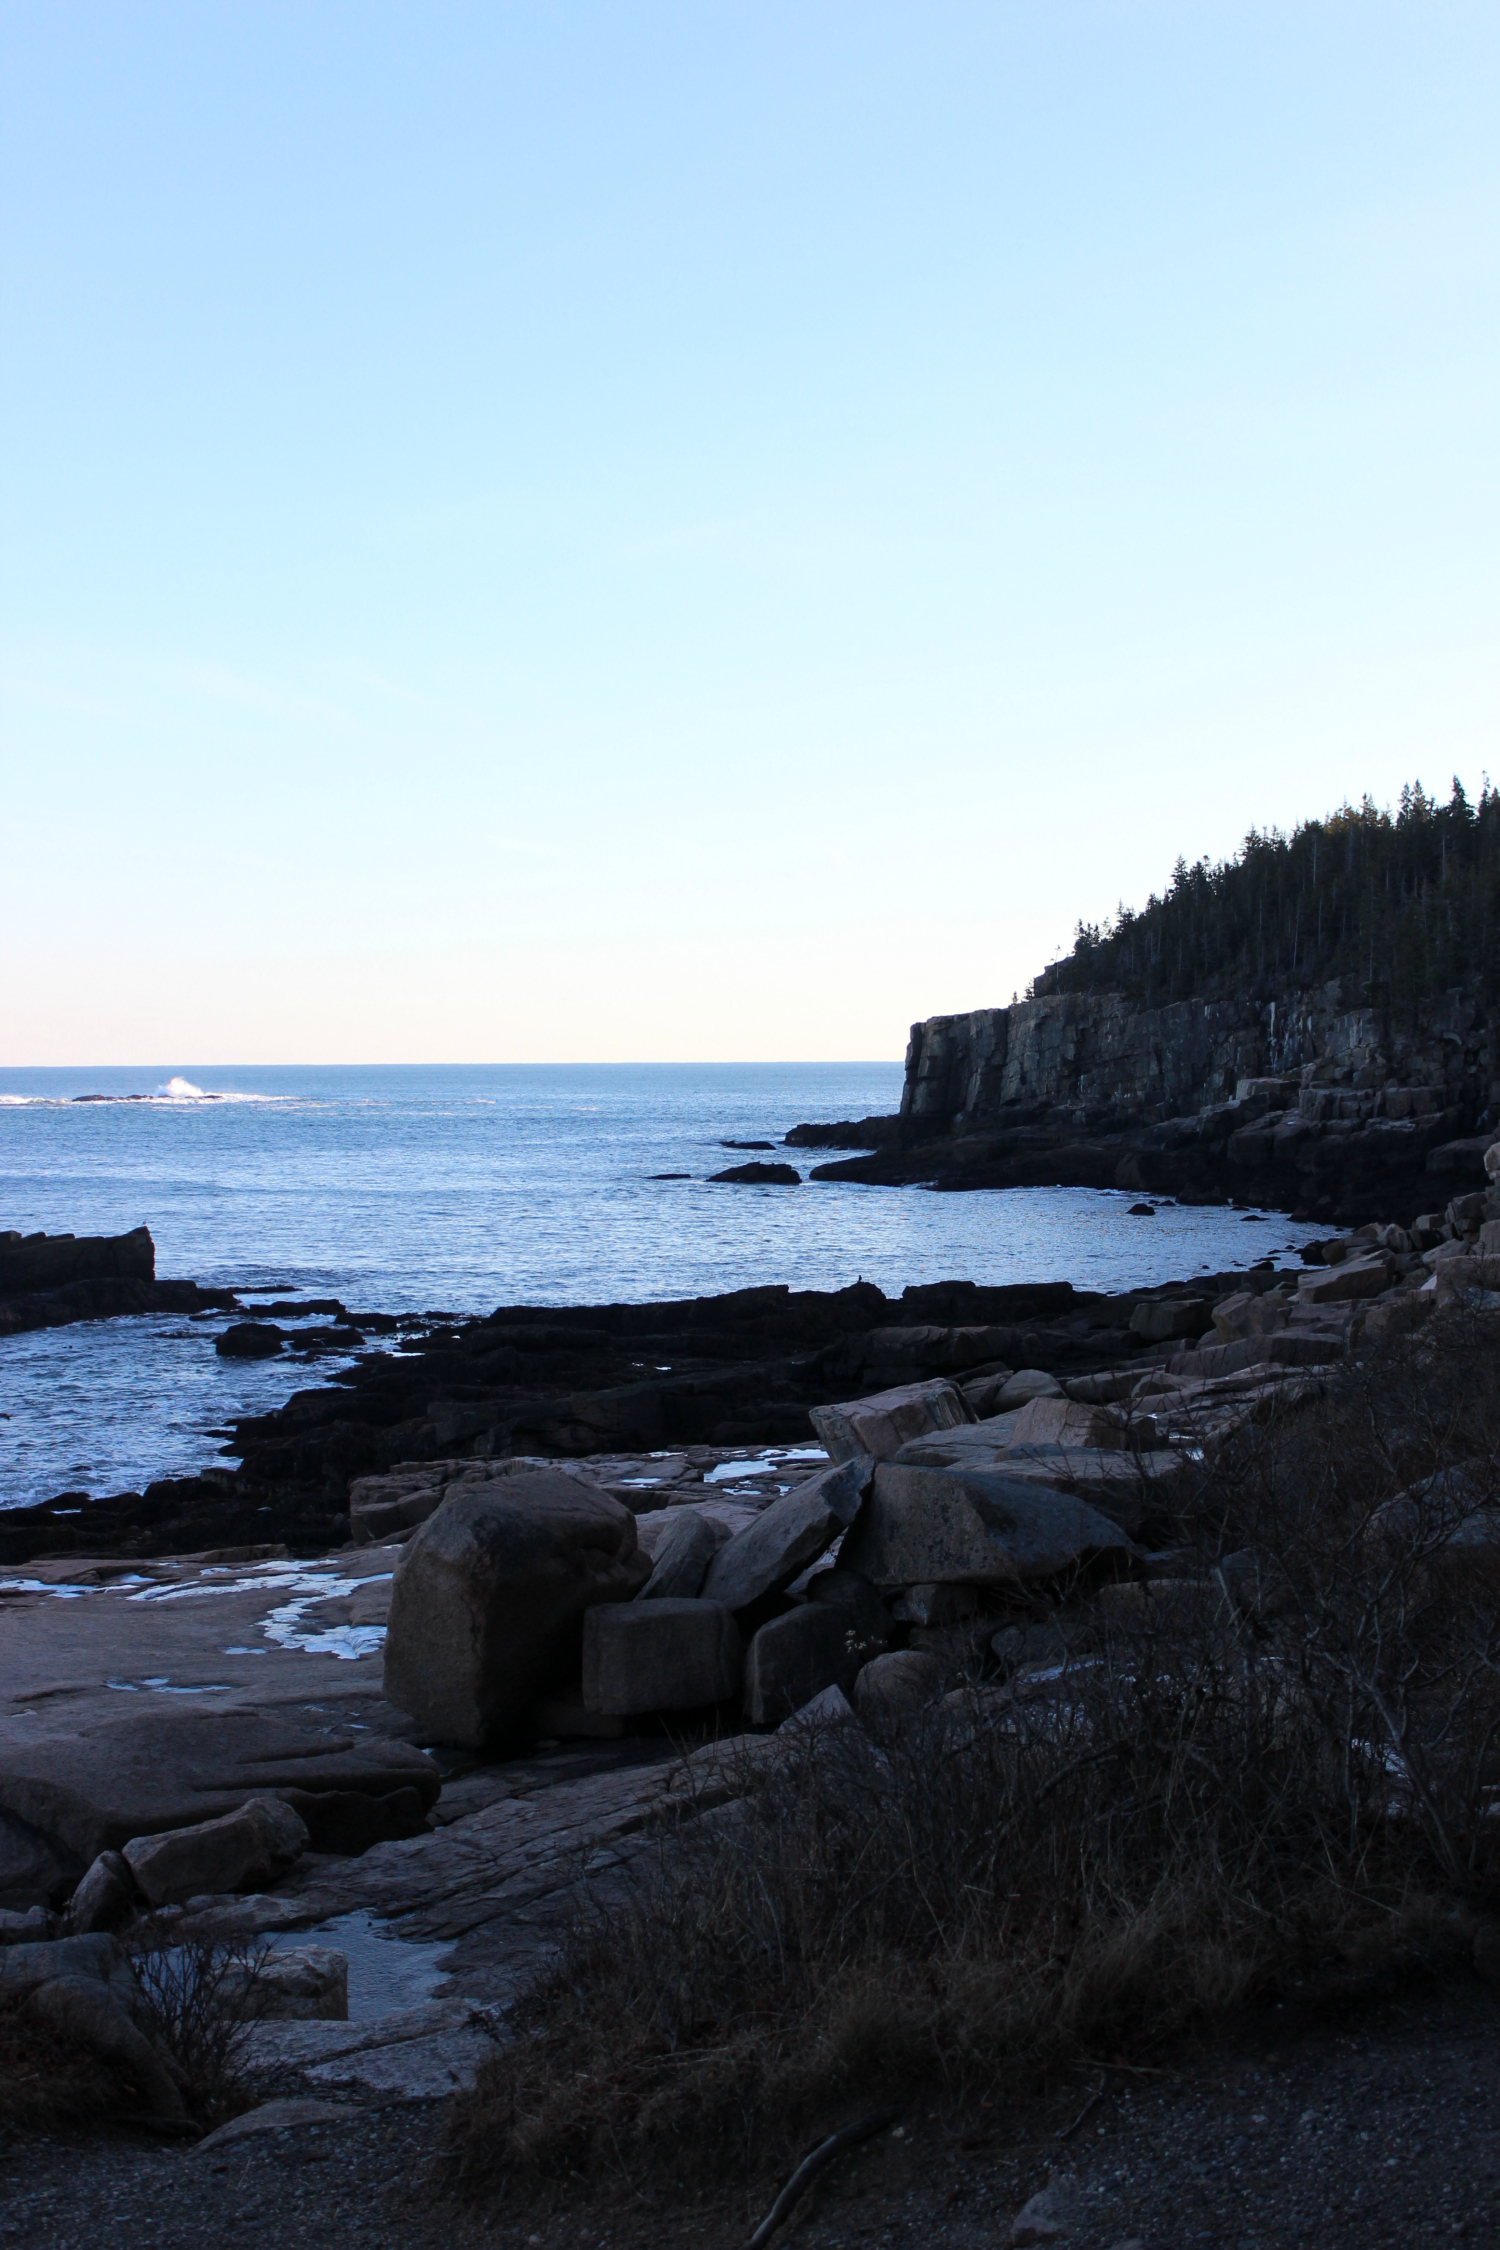 Searching for a fun Maine day trip in December? Check out this scenic Bar Harbor winter travel guide from Diary of a Debutante!